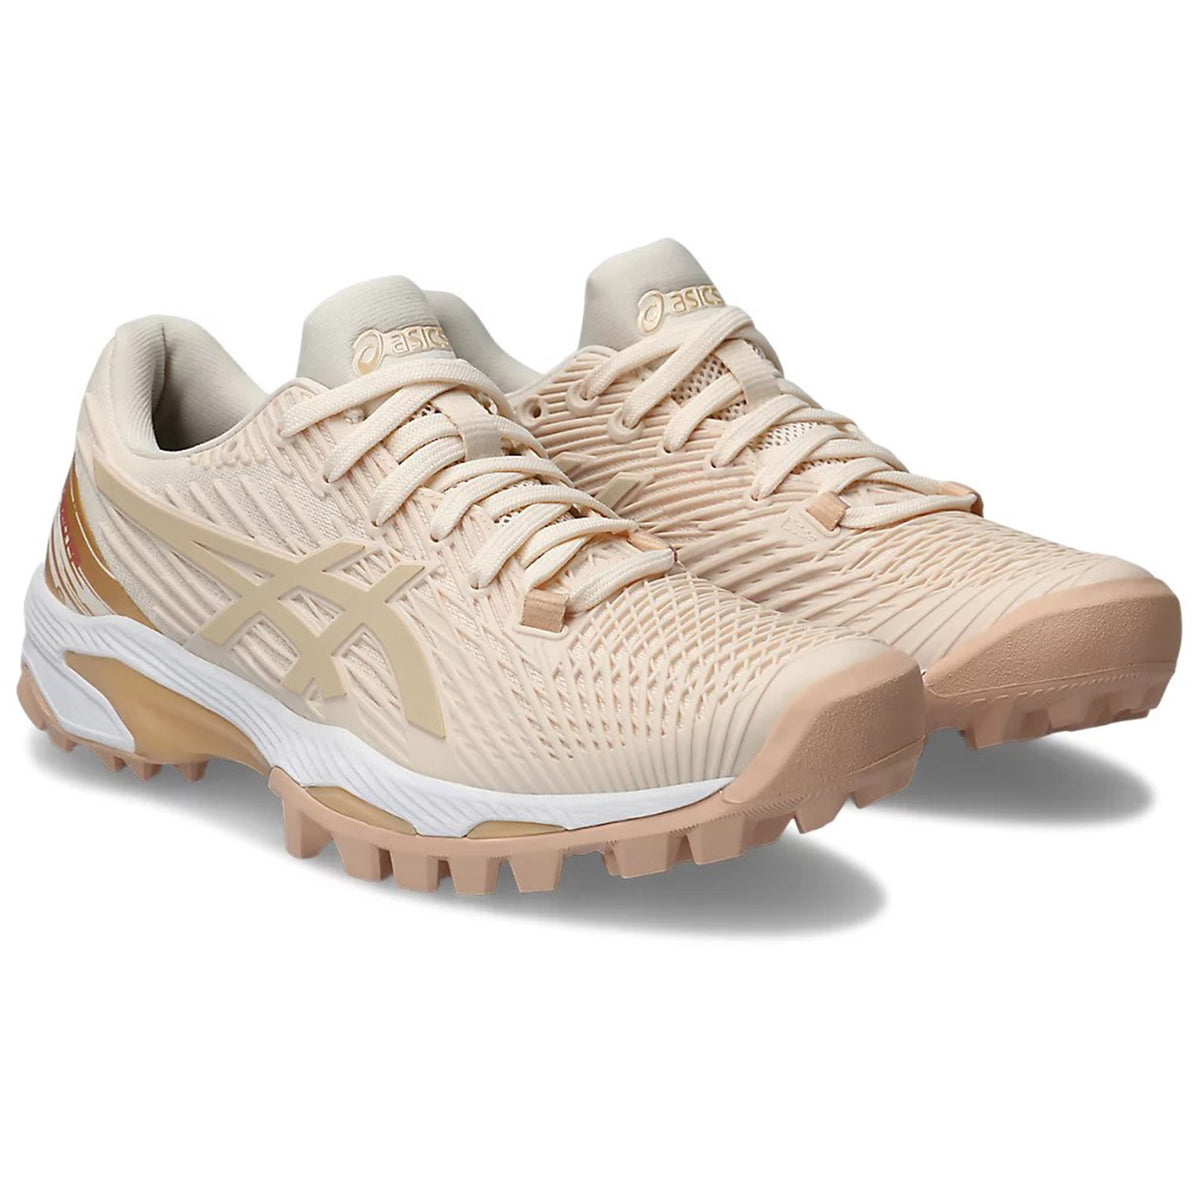 Asics Field Speed FF Hockey Shoes: Rose Dust/Champagne